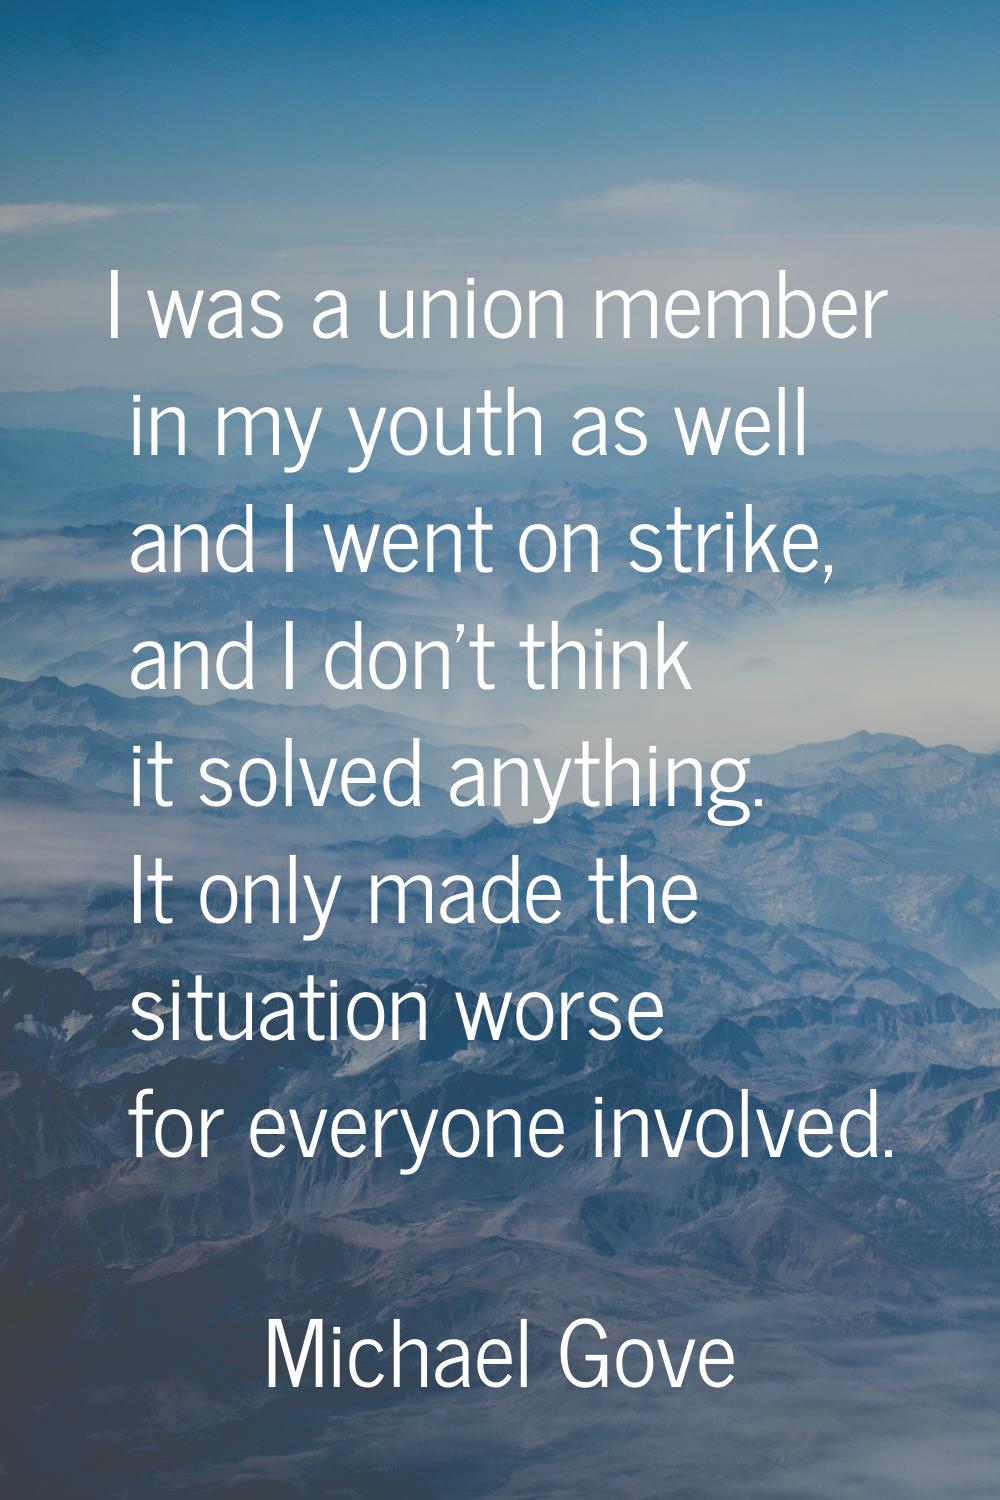 I was a union member in my youth as well and I went on strike, and I don't think it solved anything